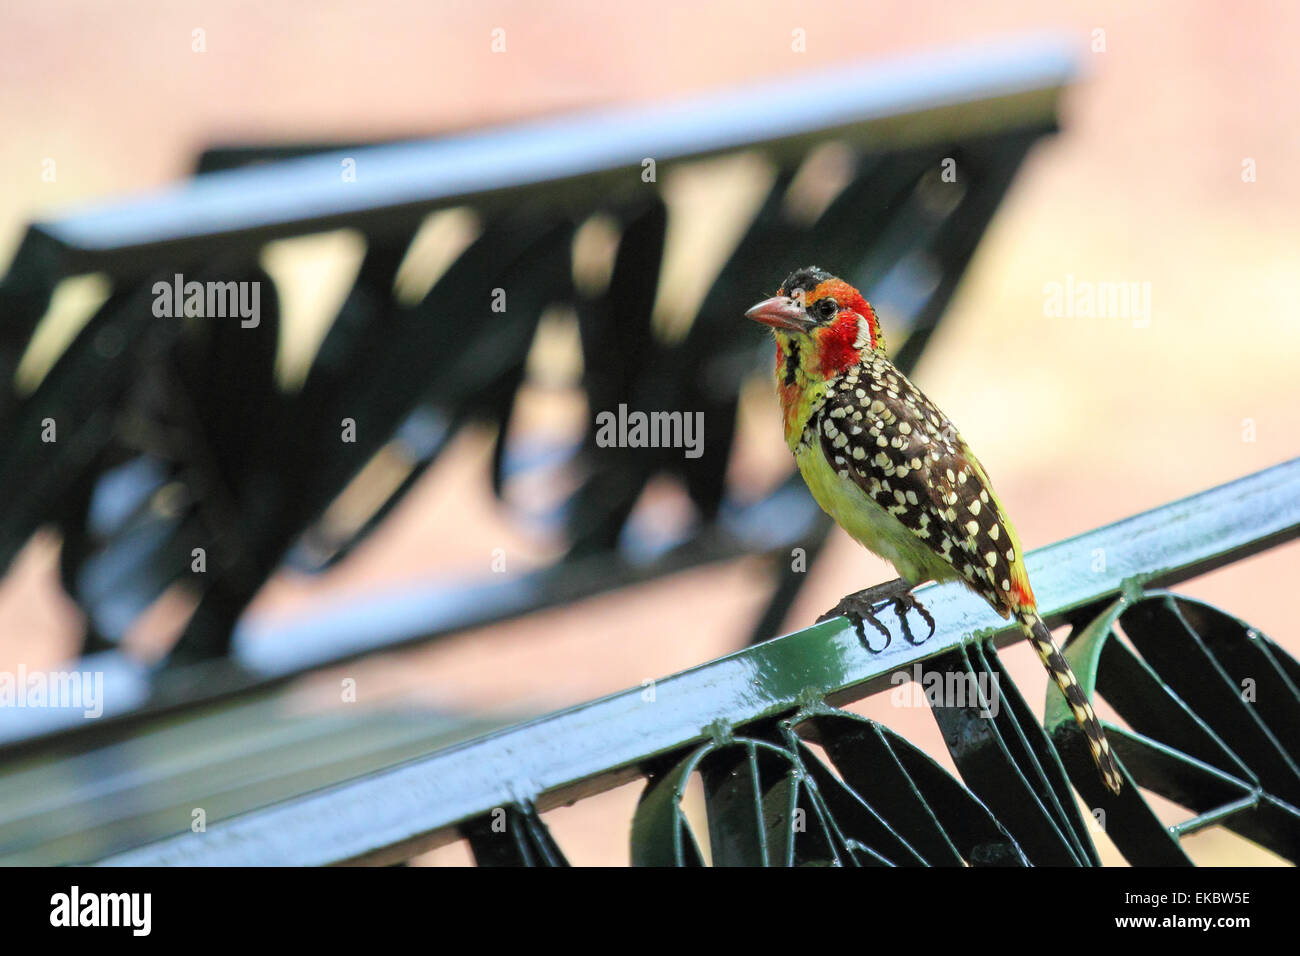 A colorful african bird known as red and yellow barbet, Trachyphonus erythrocephalus, perched on a park bench in a dining area i Stock Photo